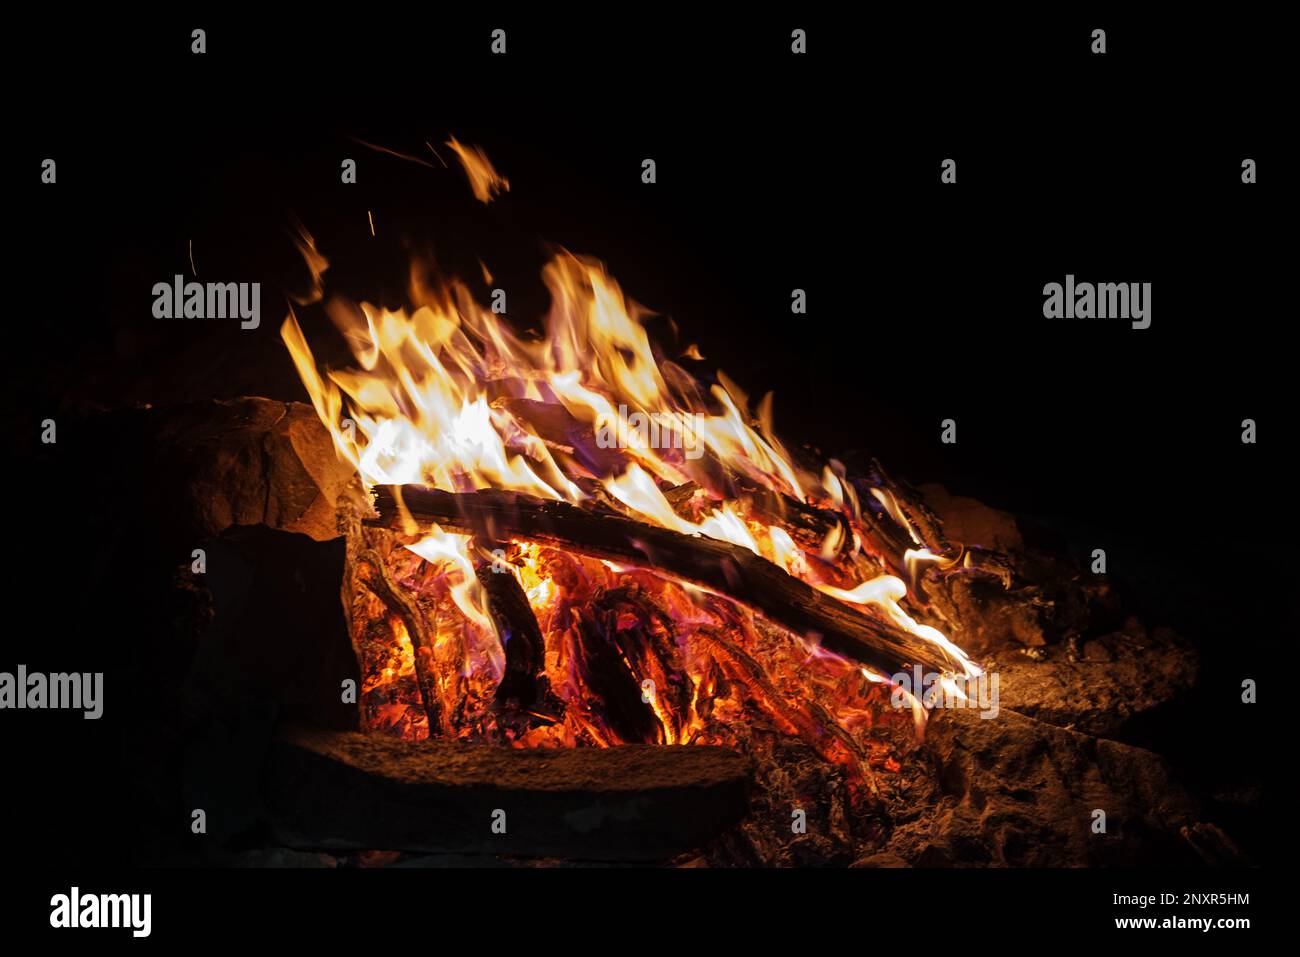 campfire at night with dark background and bed of hot coals Stock Photo